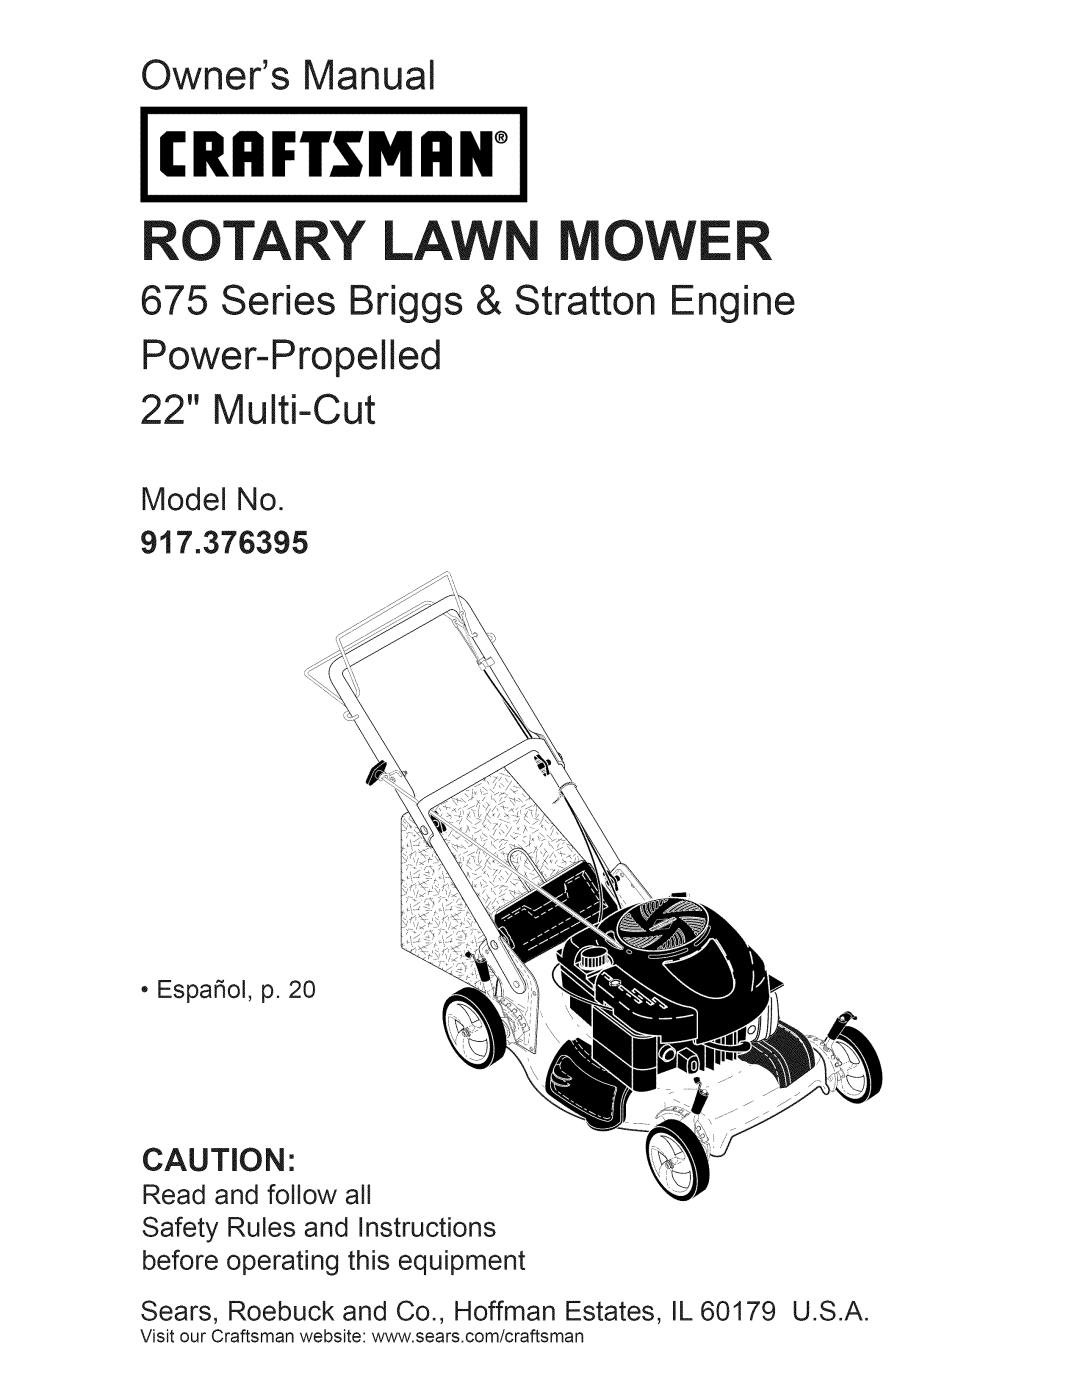 Craftsman manual Model No 917.376395, Craftsman, Rotary Lawn Mower, Owners Manual, Series Briggs & Stratton Engine 